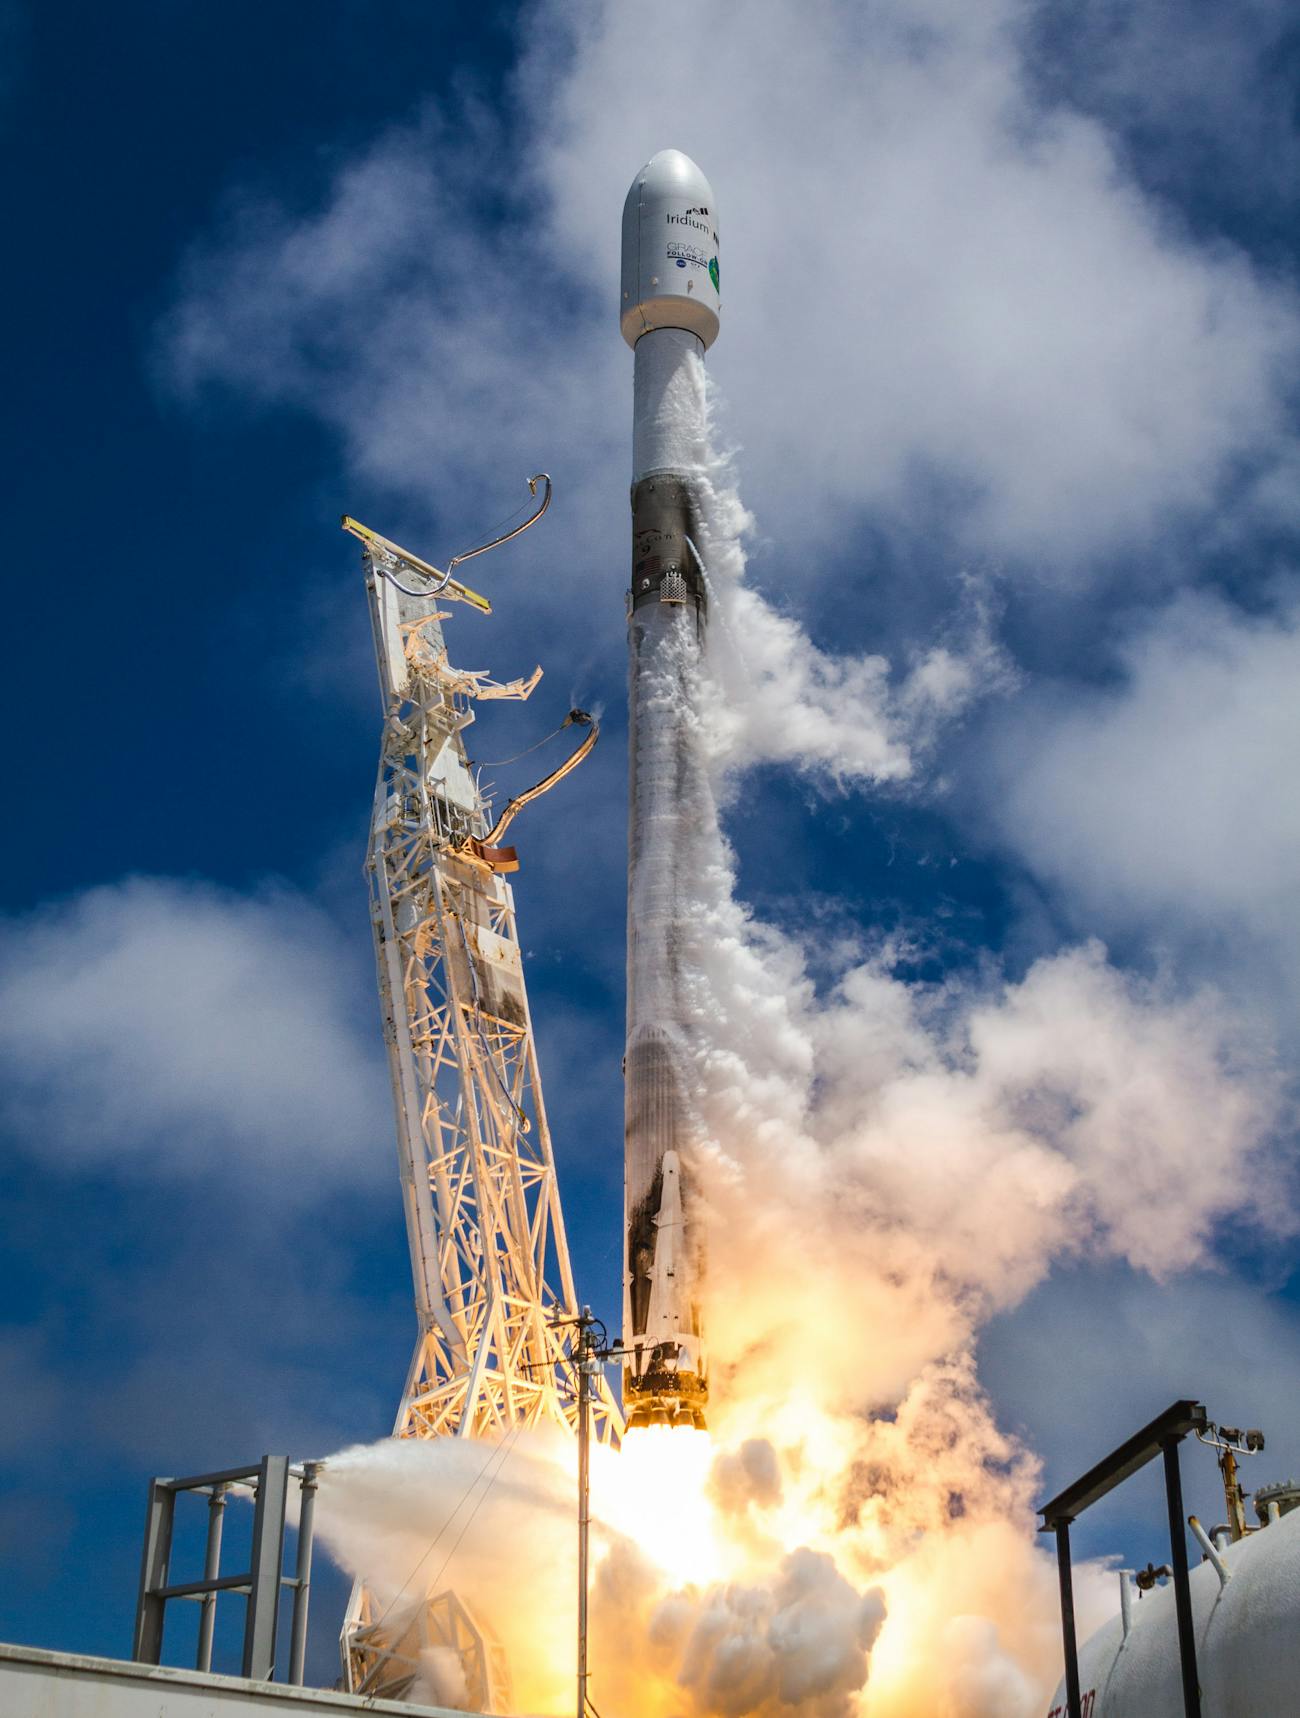 SpaceX: Elon Musk Shares Stunning Photos of Climate Change Satellite Launch | Inverse1300 x 1718